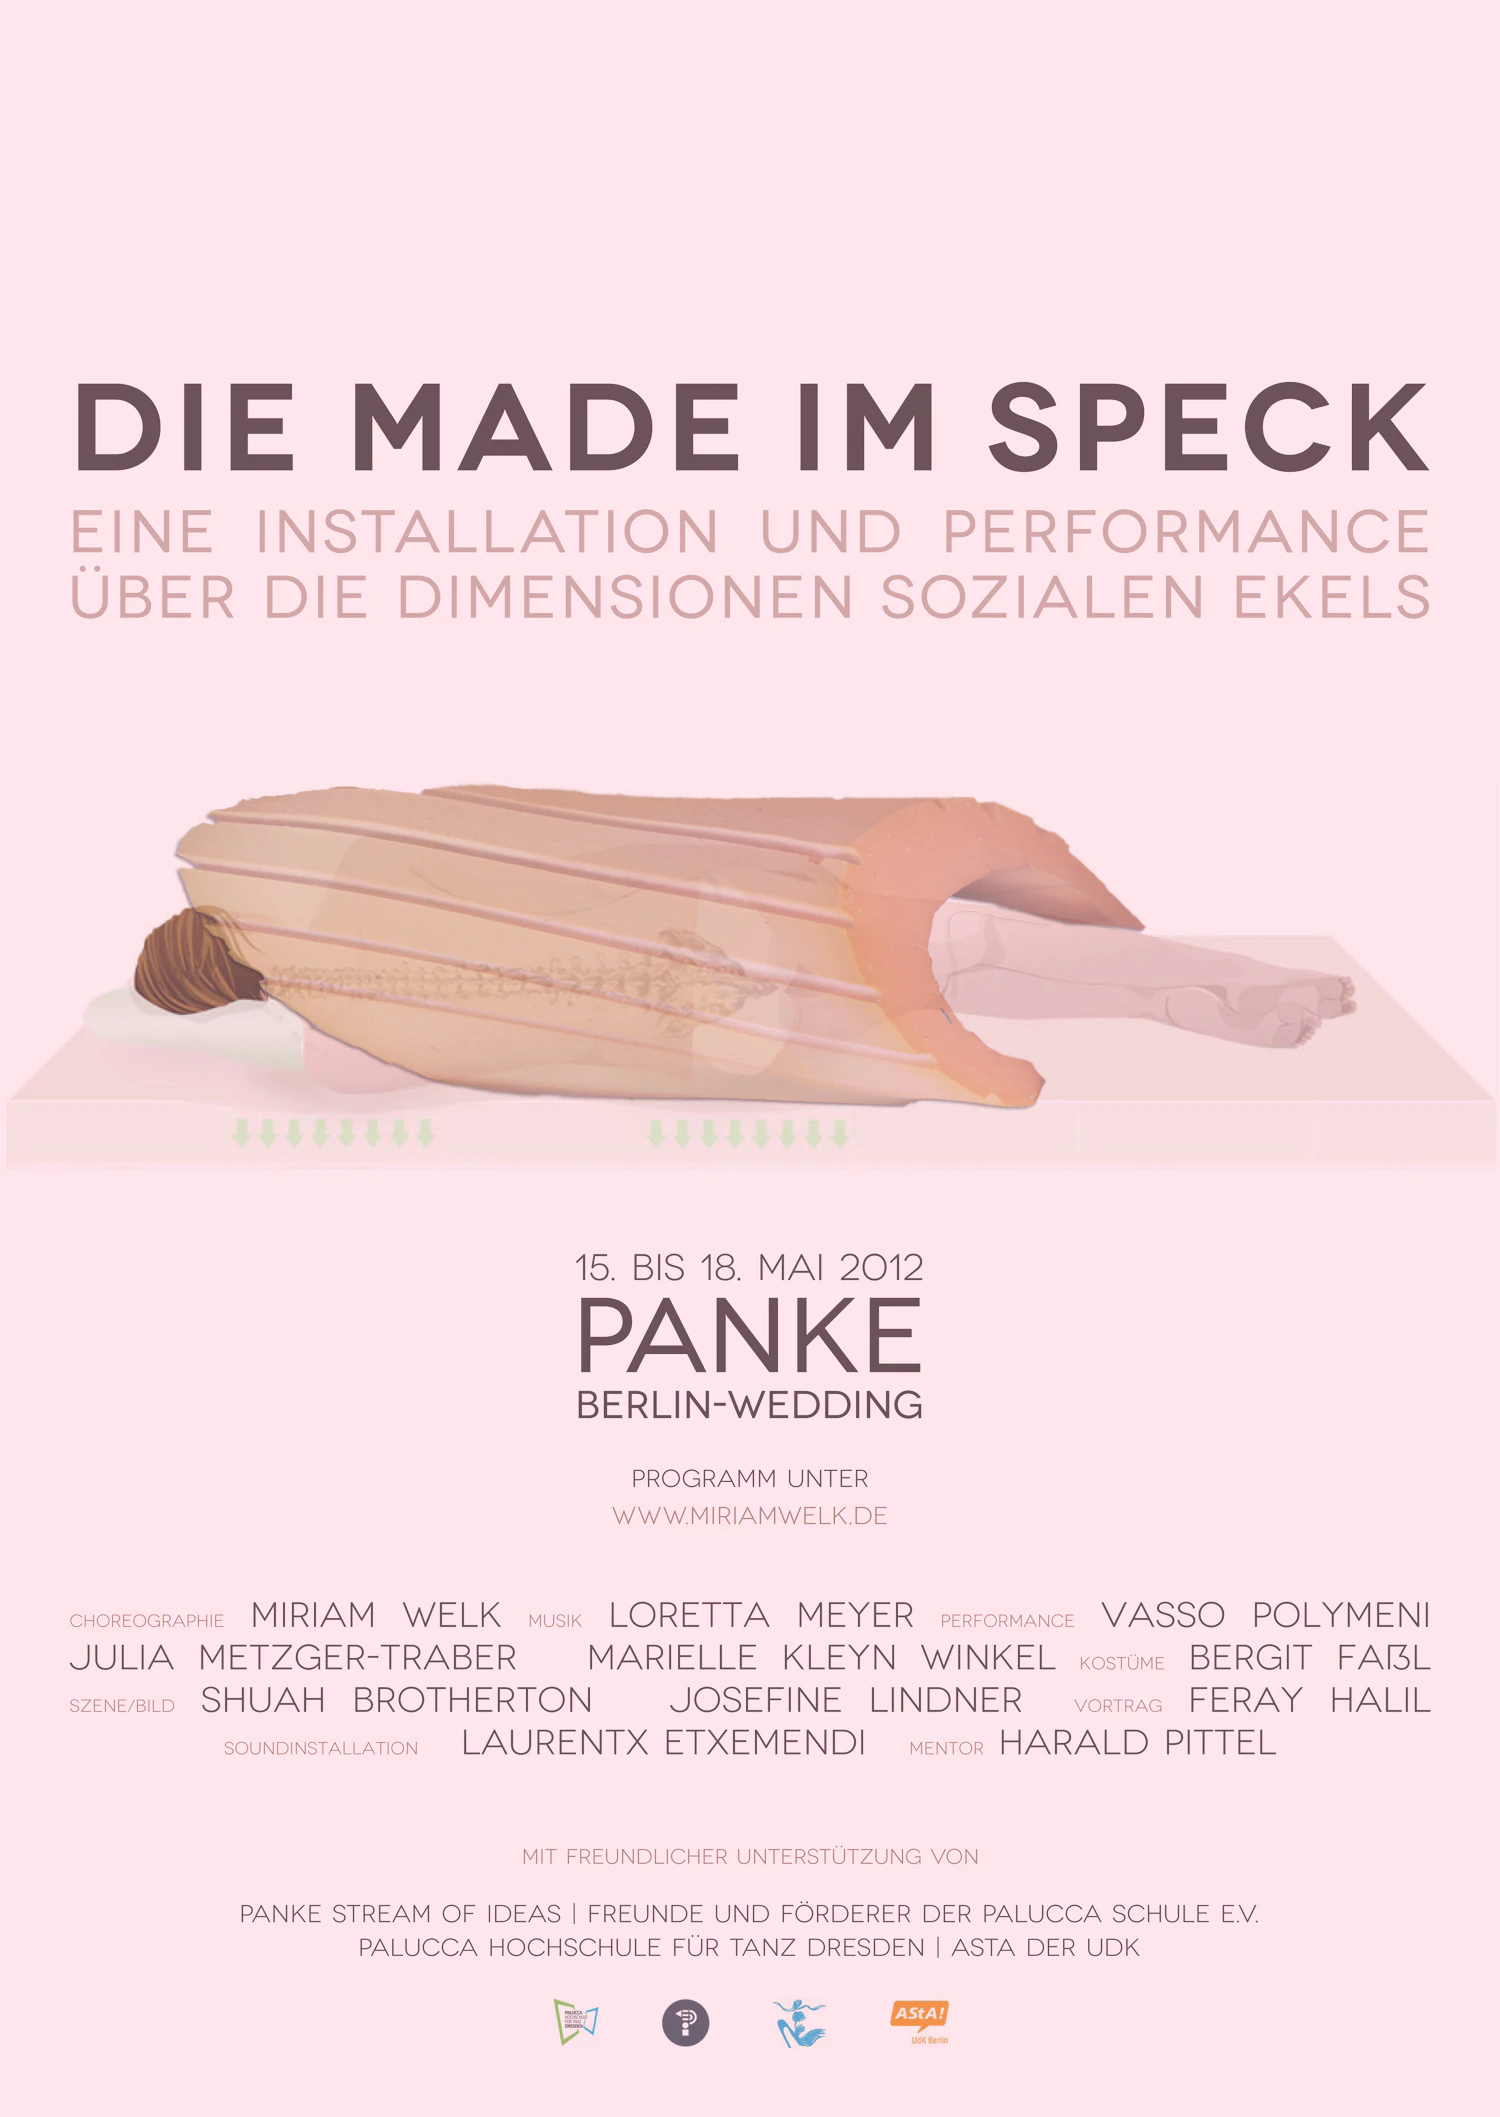 die made im speck | an installation and performance project about the dimensions of social disgust